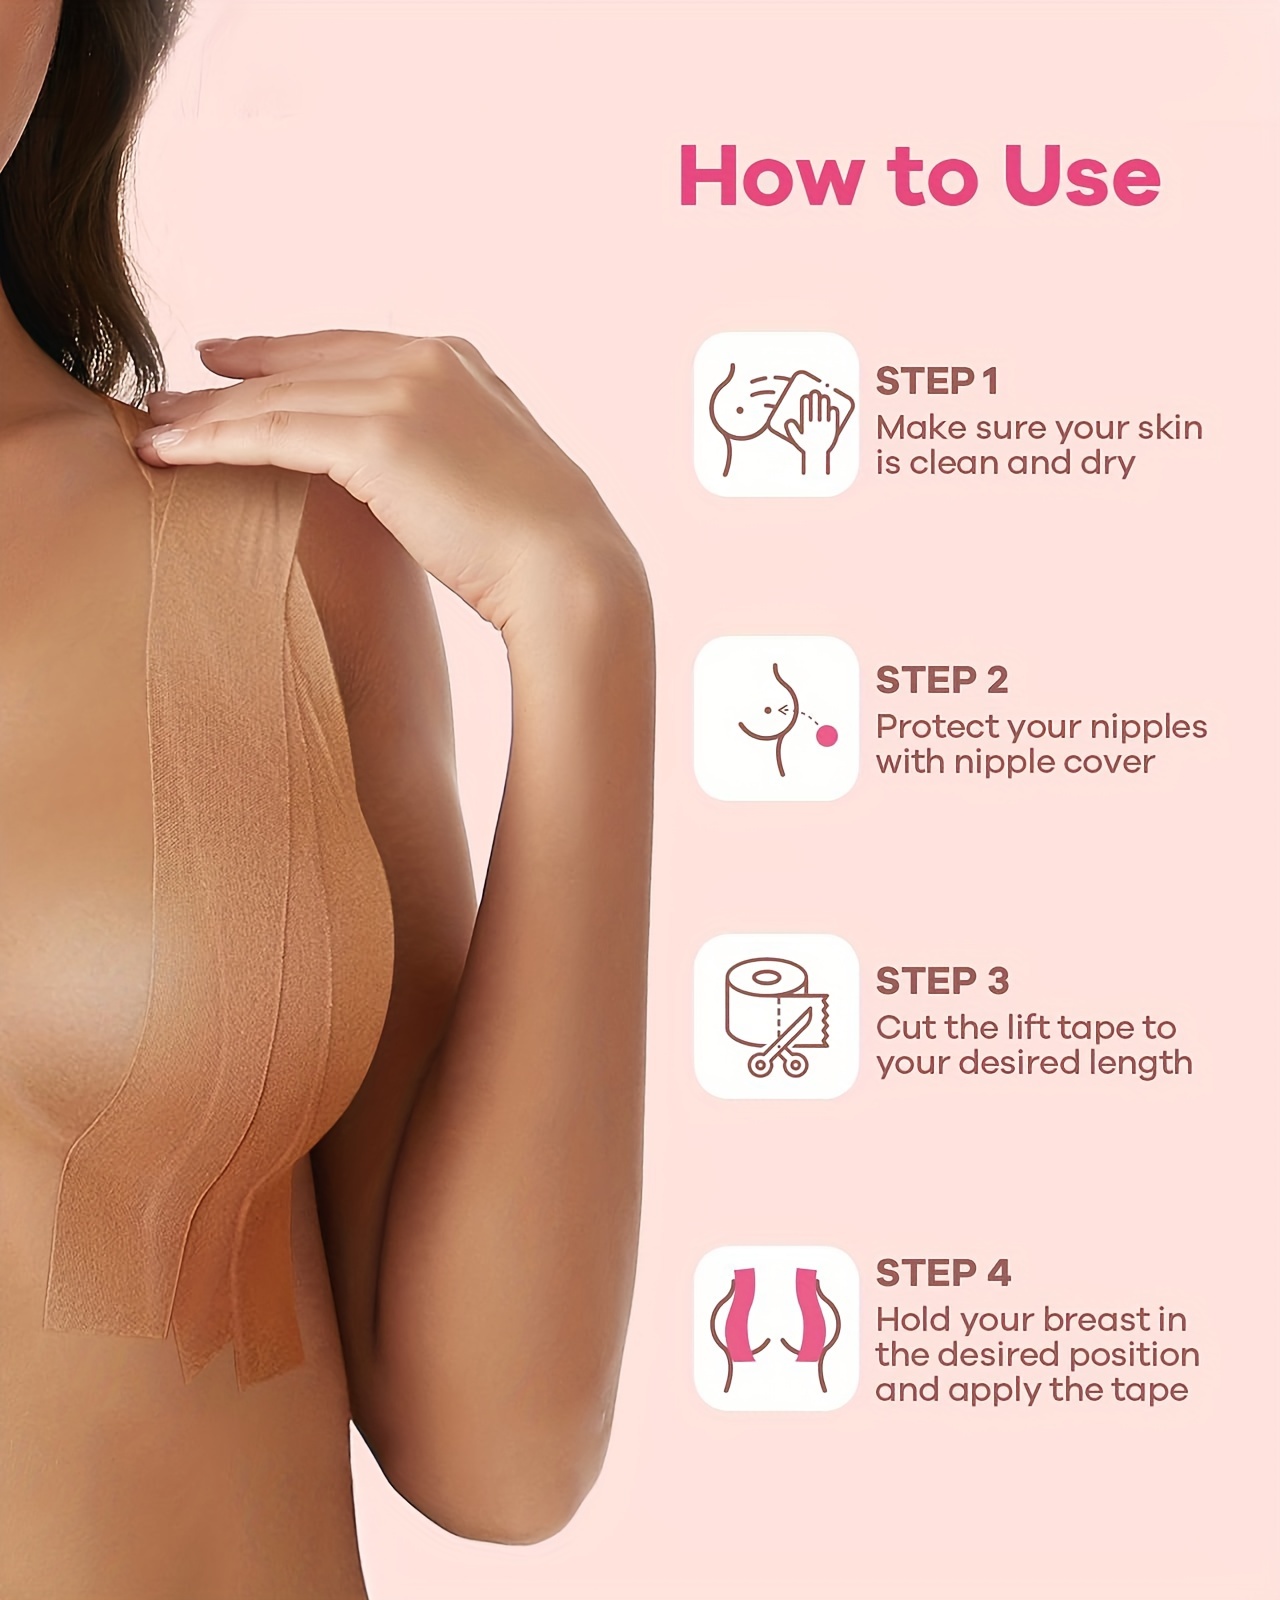 Zexumo Boob Tape for Breast Lift, Achieve Chest Brace Lift & Contour of  Breasts, Sticky Body Tape for Push up & Shape in All Clothing Fabric Dress  Types